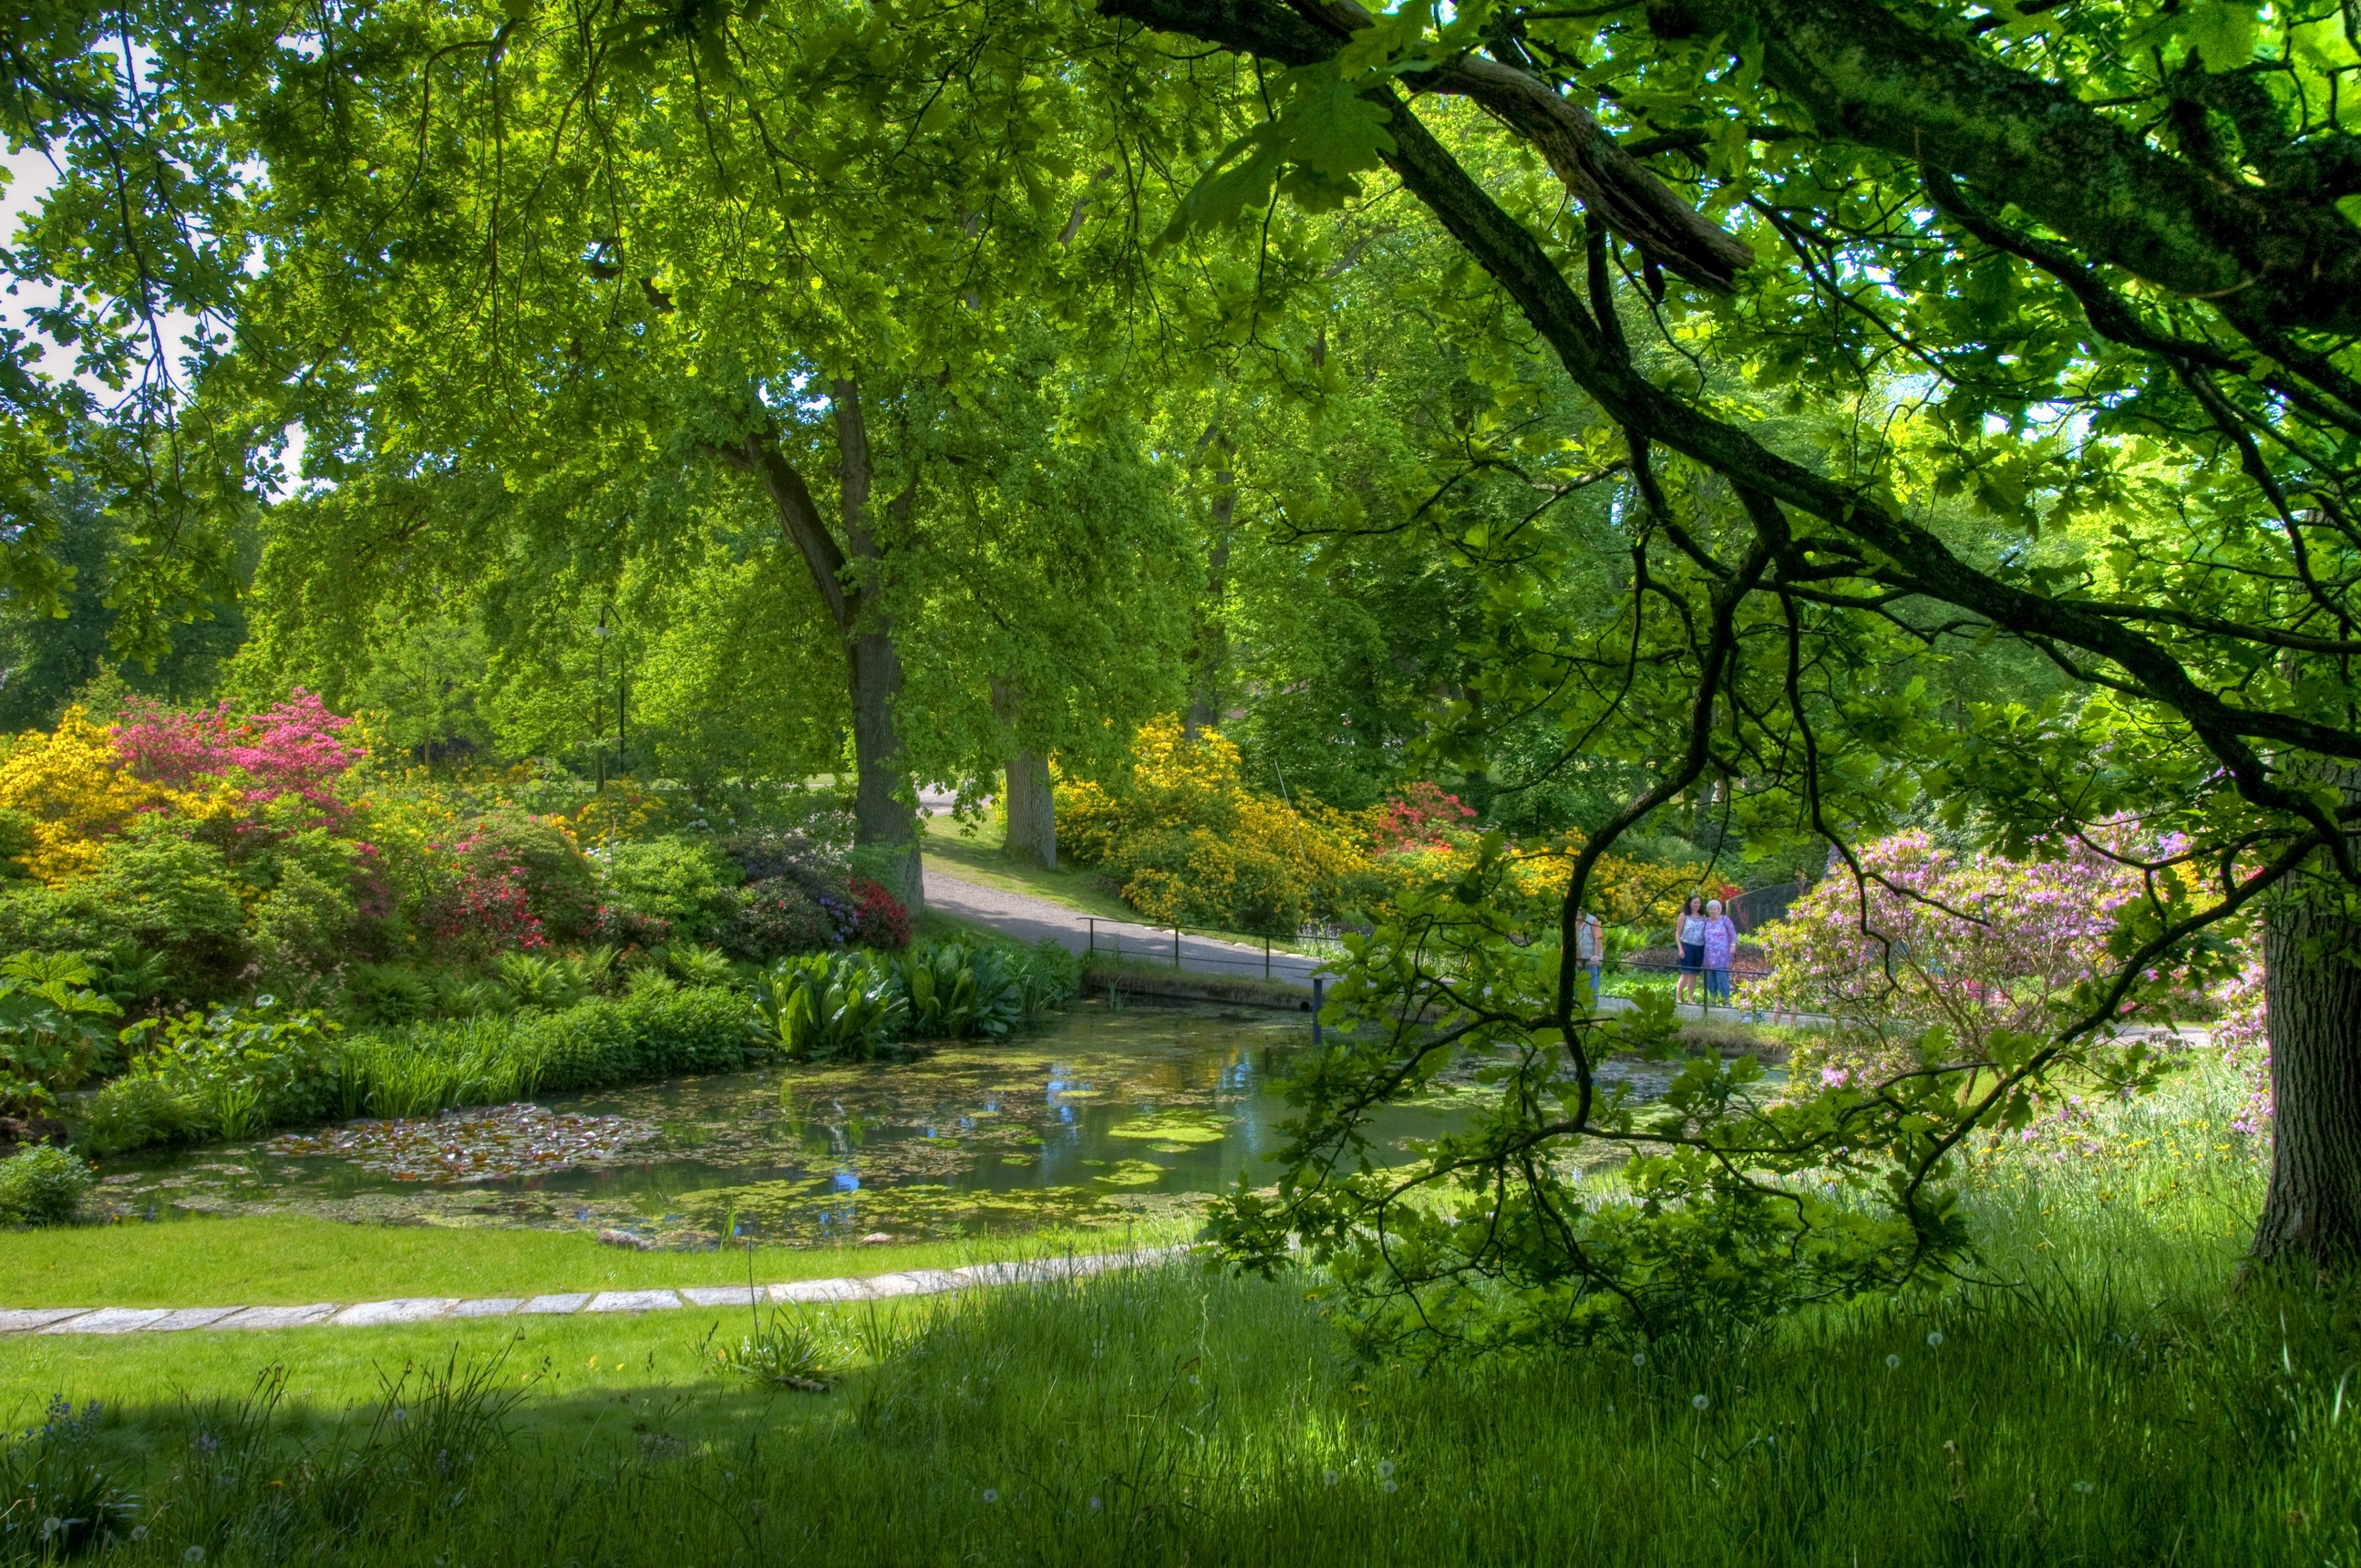 garden, people, nature, trees, green, pond, serenity